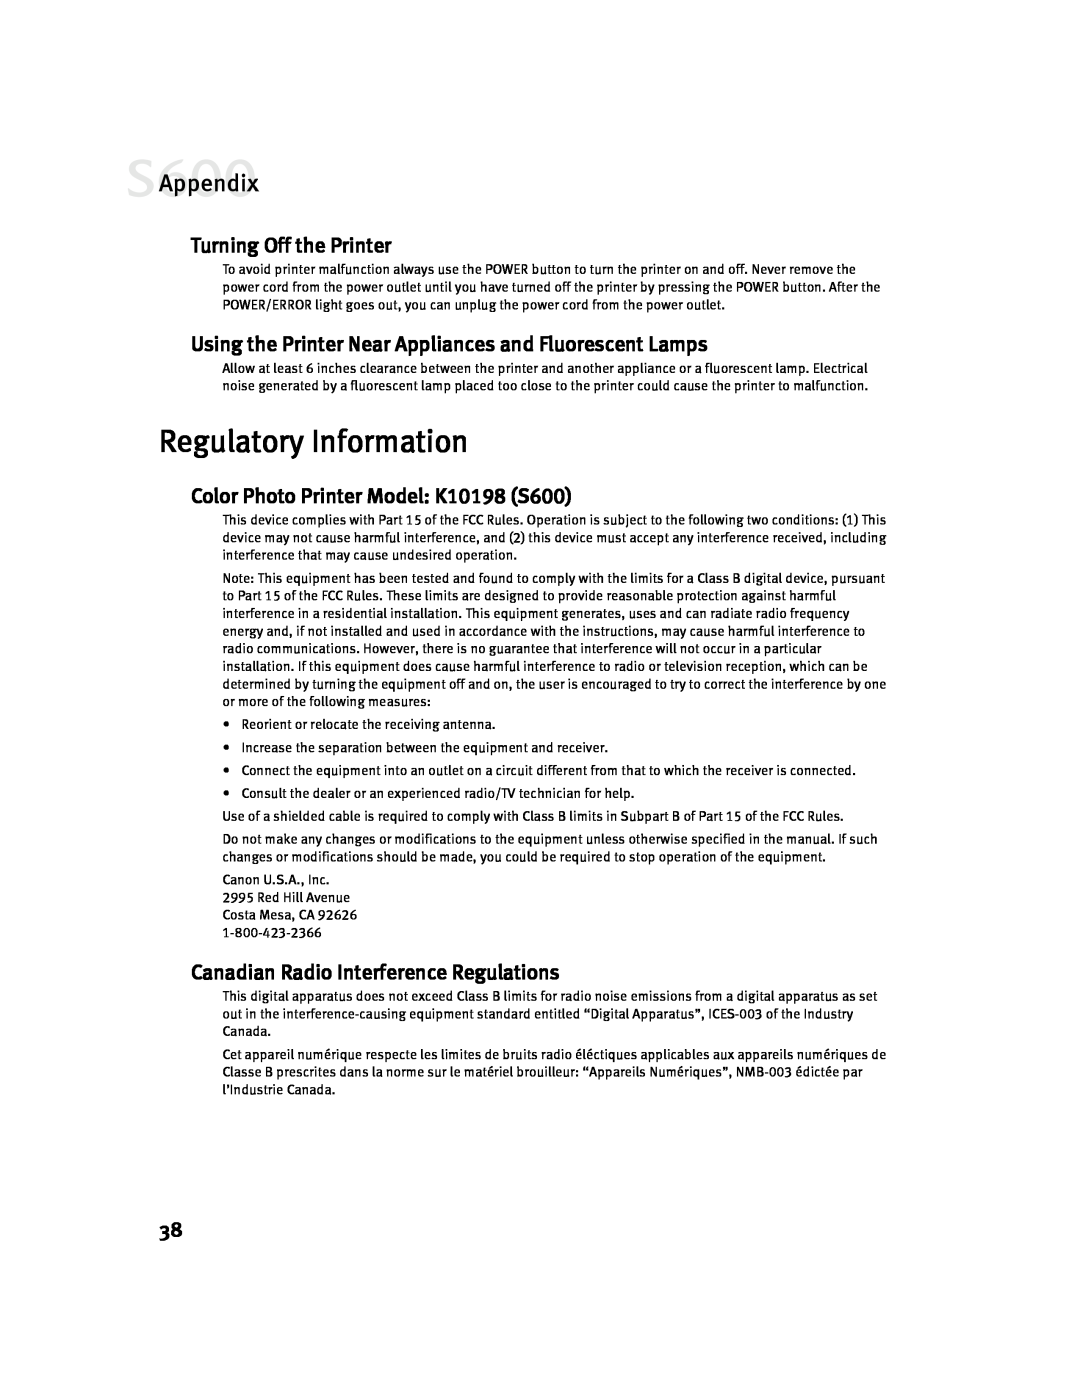 Canon S600 Regulatory Information, Turning Off the Printer, Using the Printer Near Appliances and Fluorescent Lamps 